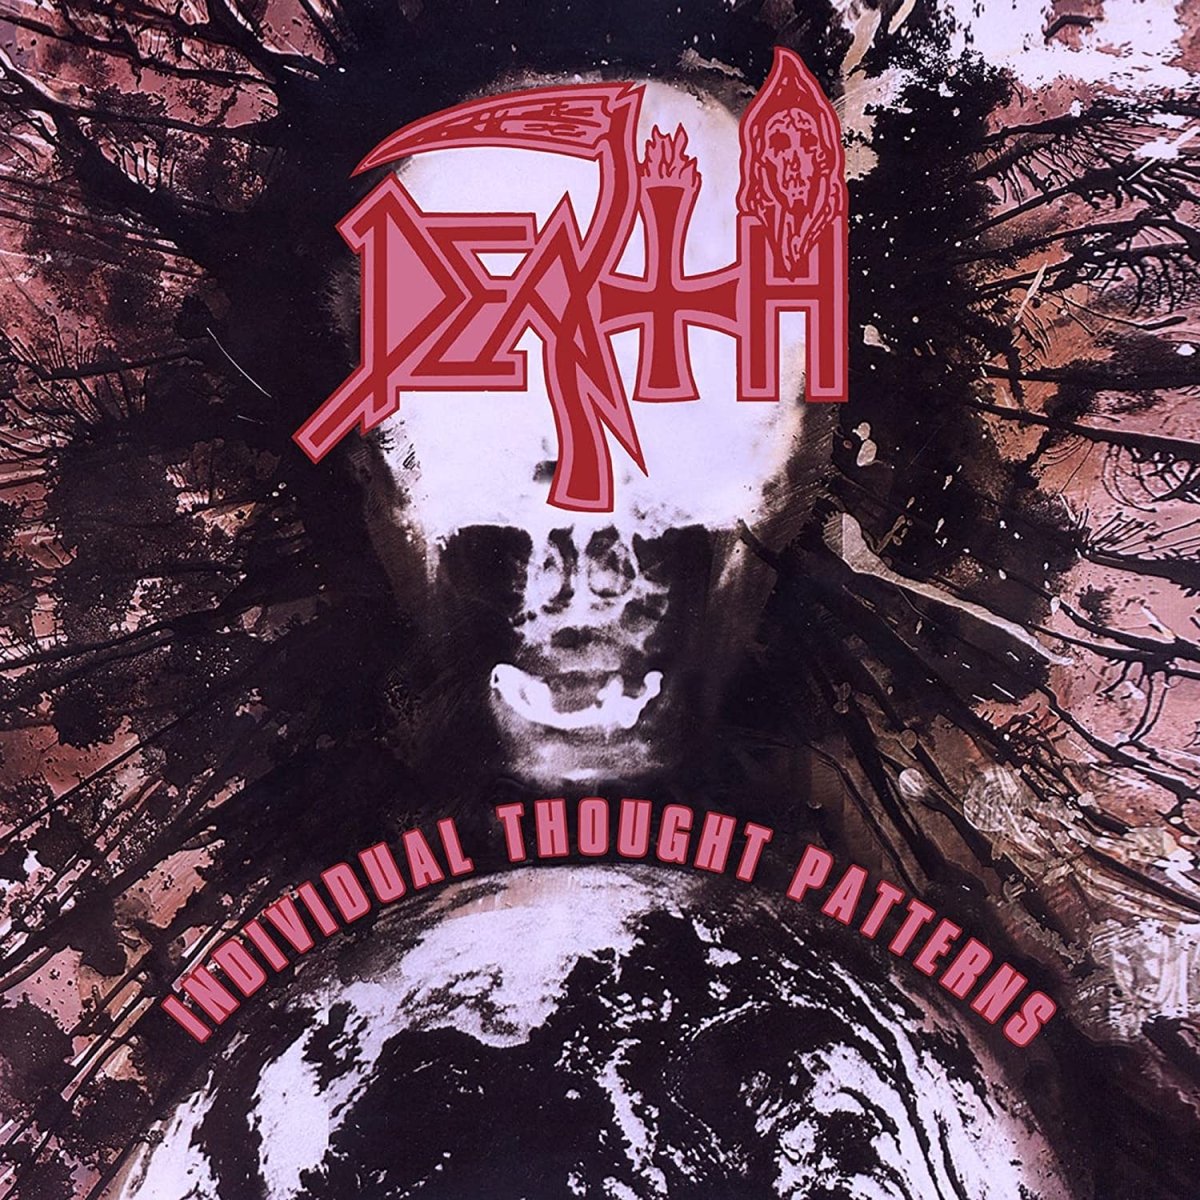 Death - Individual Thought Patterns Records & LPs Vinyl